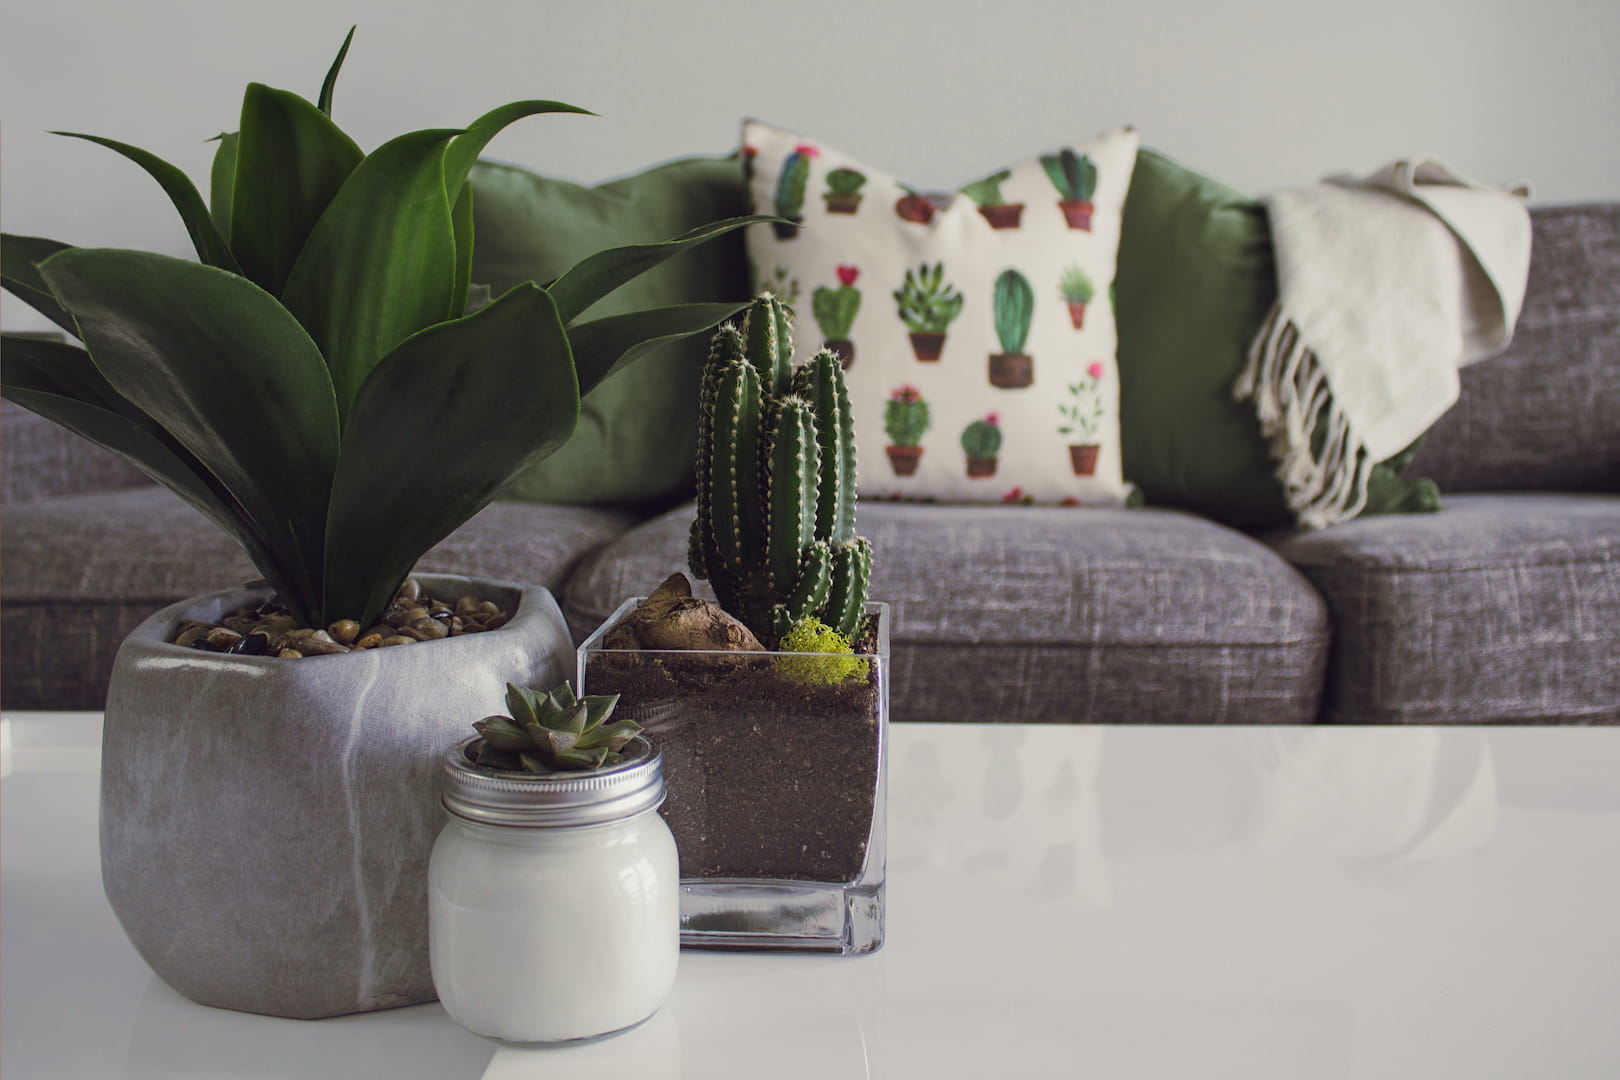 10 of the Best Artificial Plants to Buy for Your Home